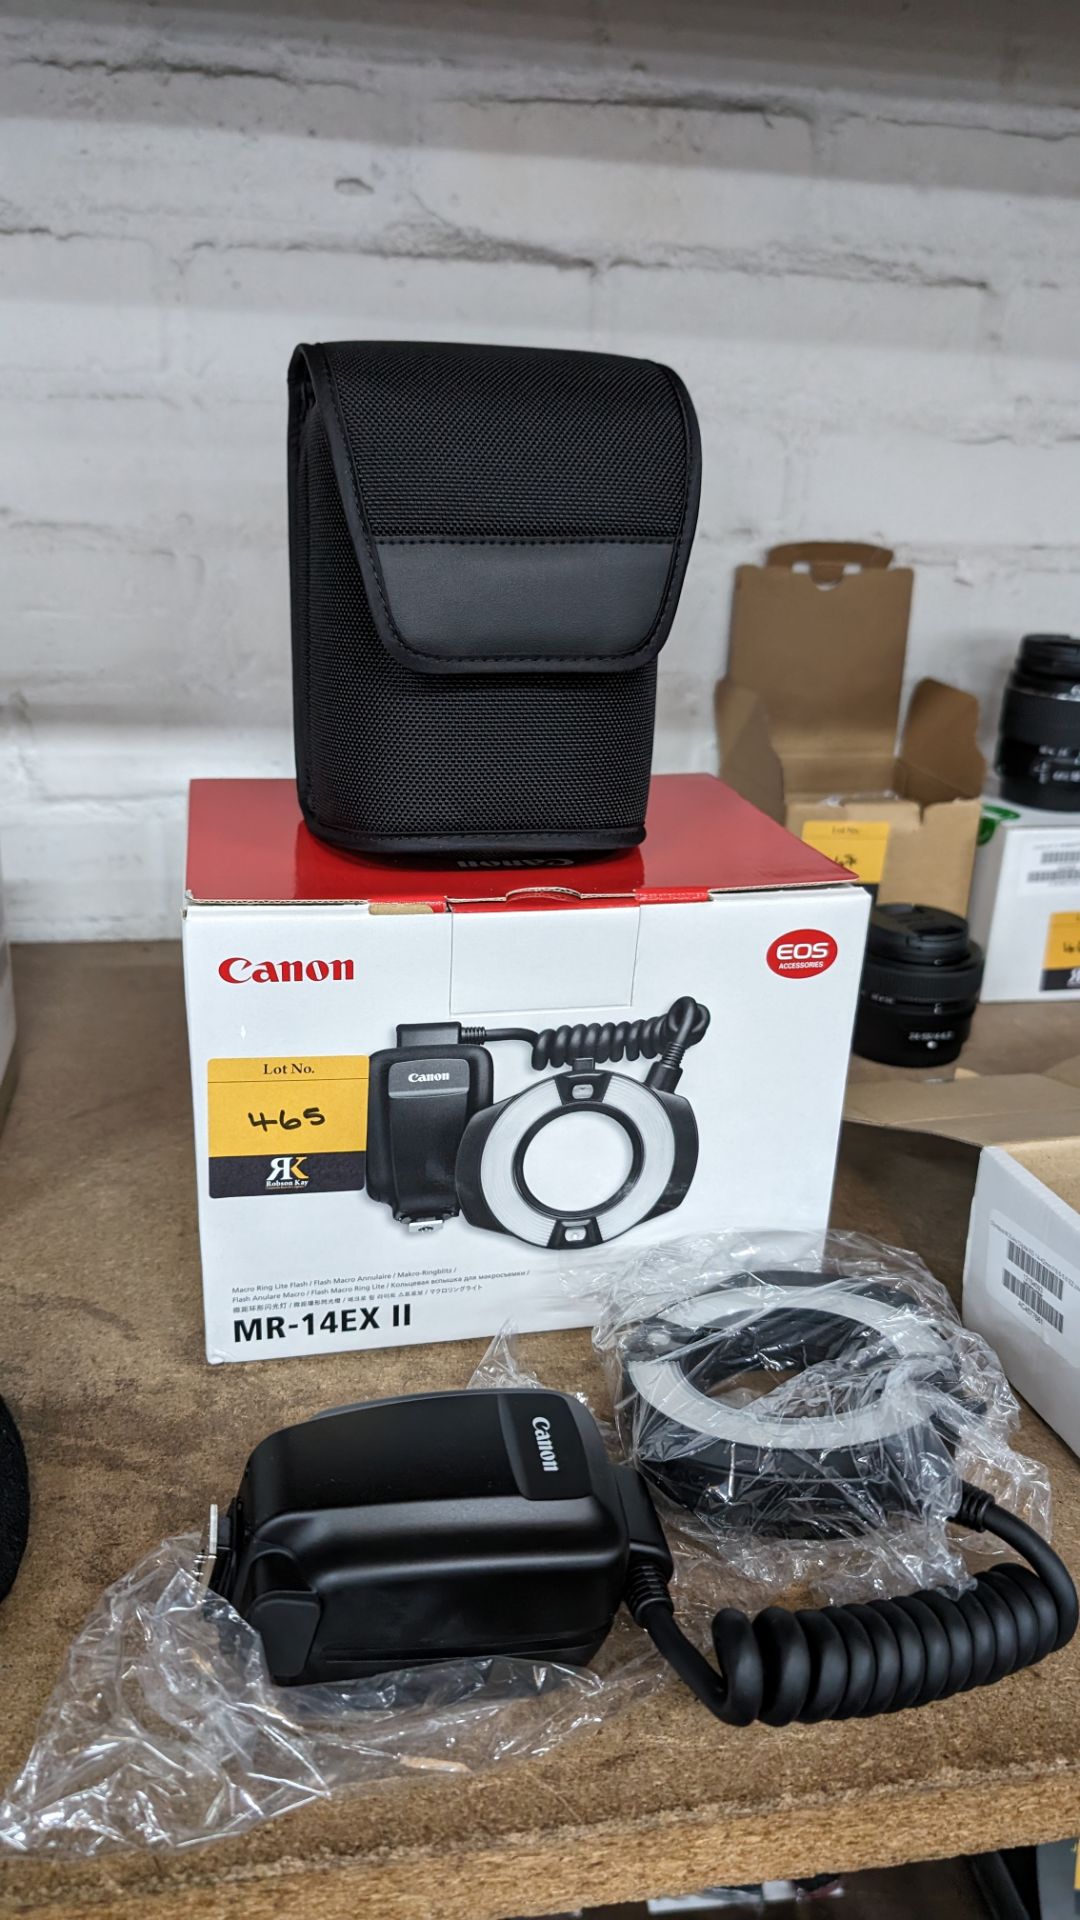 Canon MR-14EX II macro ring light flash. Includes soft carry case